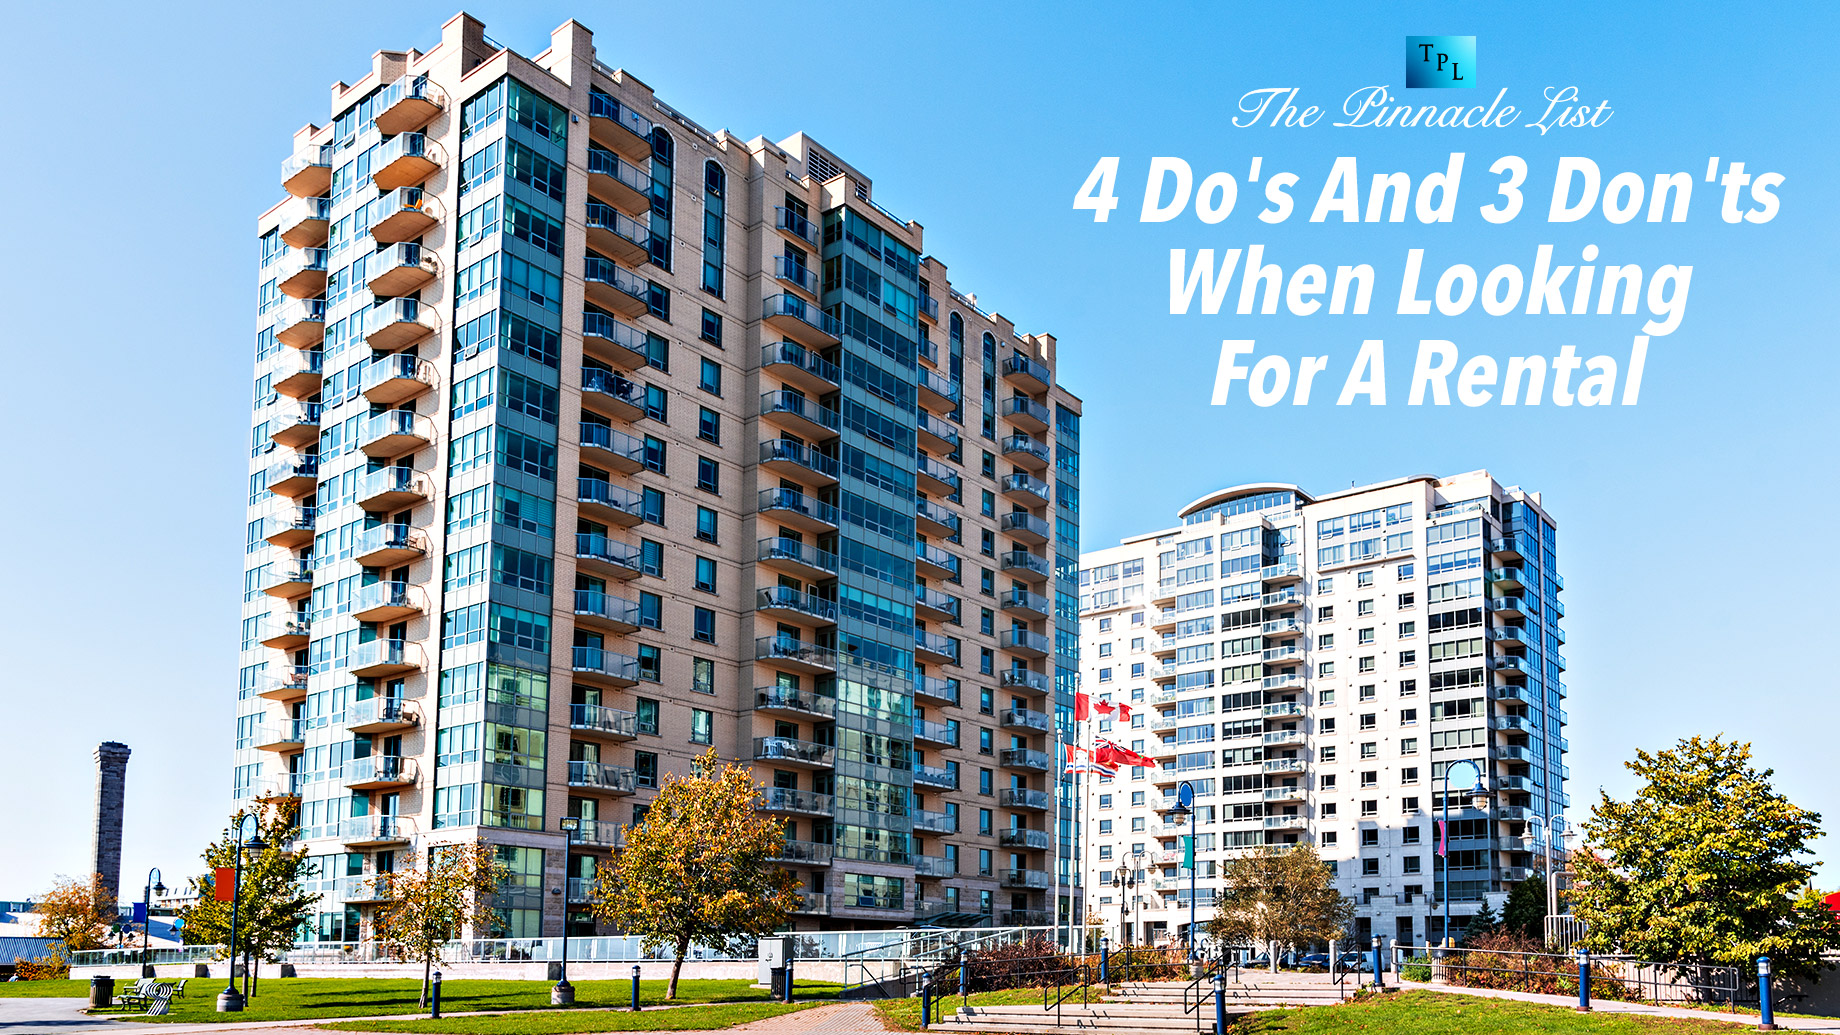 4 Do's And 3 Don'ts When Looking For A Rental